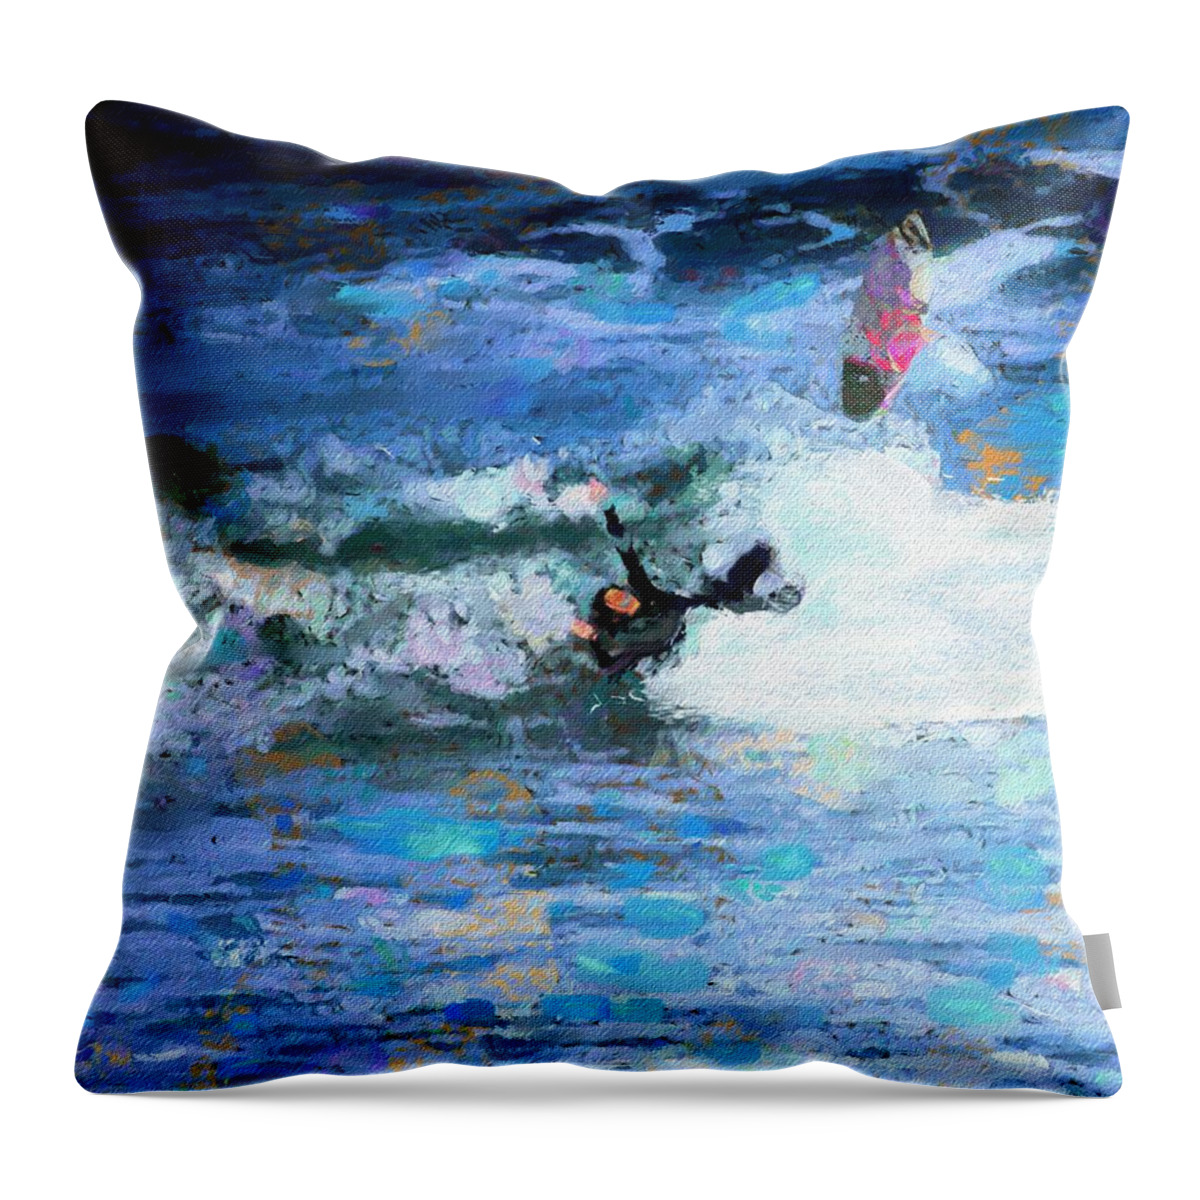 Fine Art Throw Pillow featuring the digital art Tossed by The Surf by David Lane